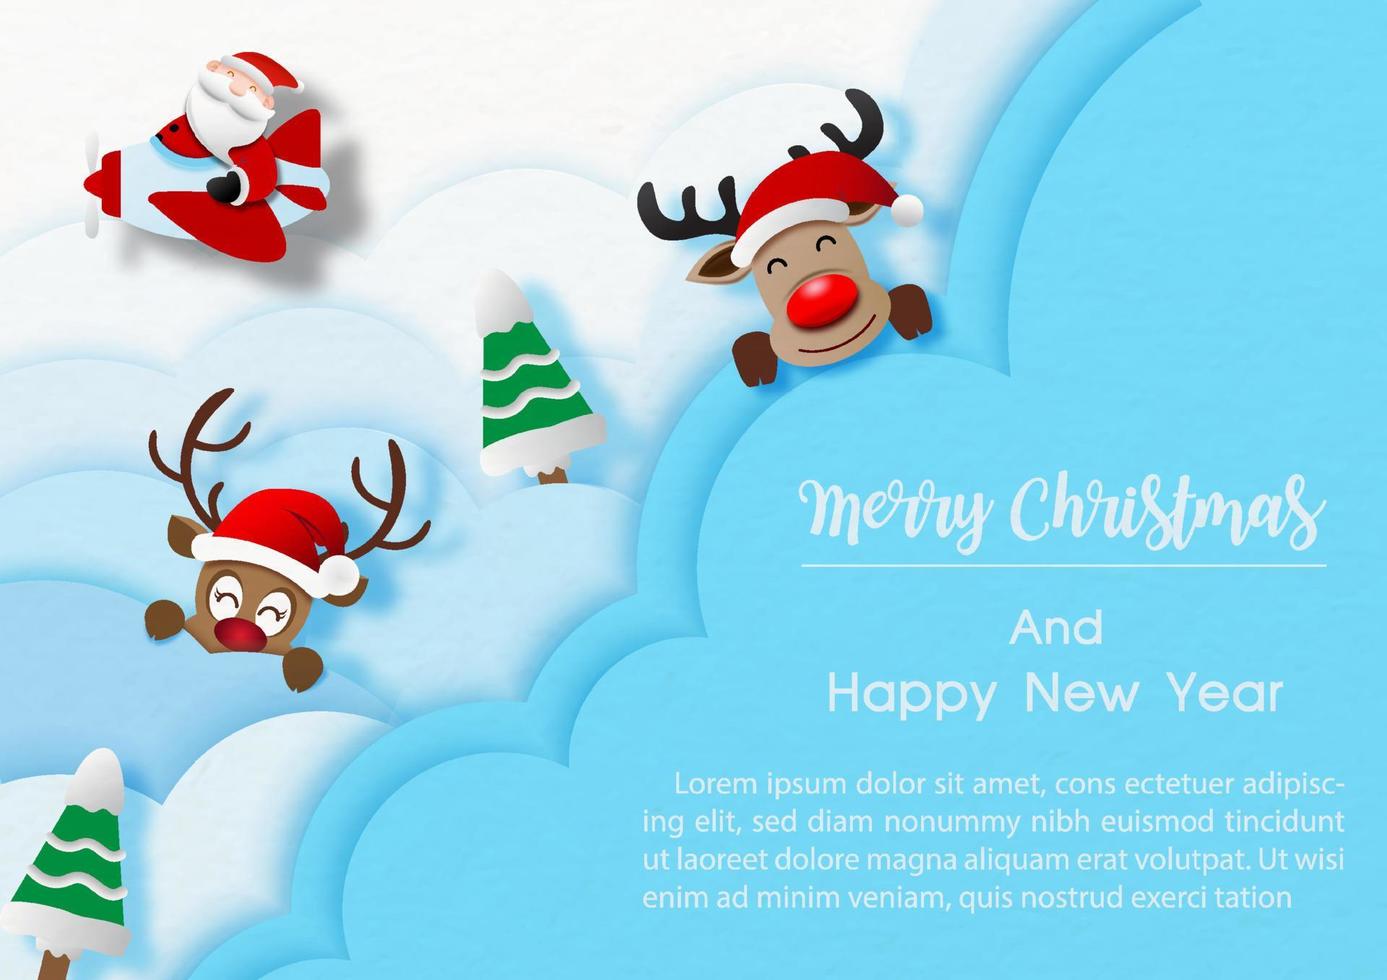 Santa cruse driving a propeller plane with reindeer in blue clouds and Christmas wording, example texts on blue background. Christmas greeting card in paper cut style and vector design.